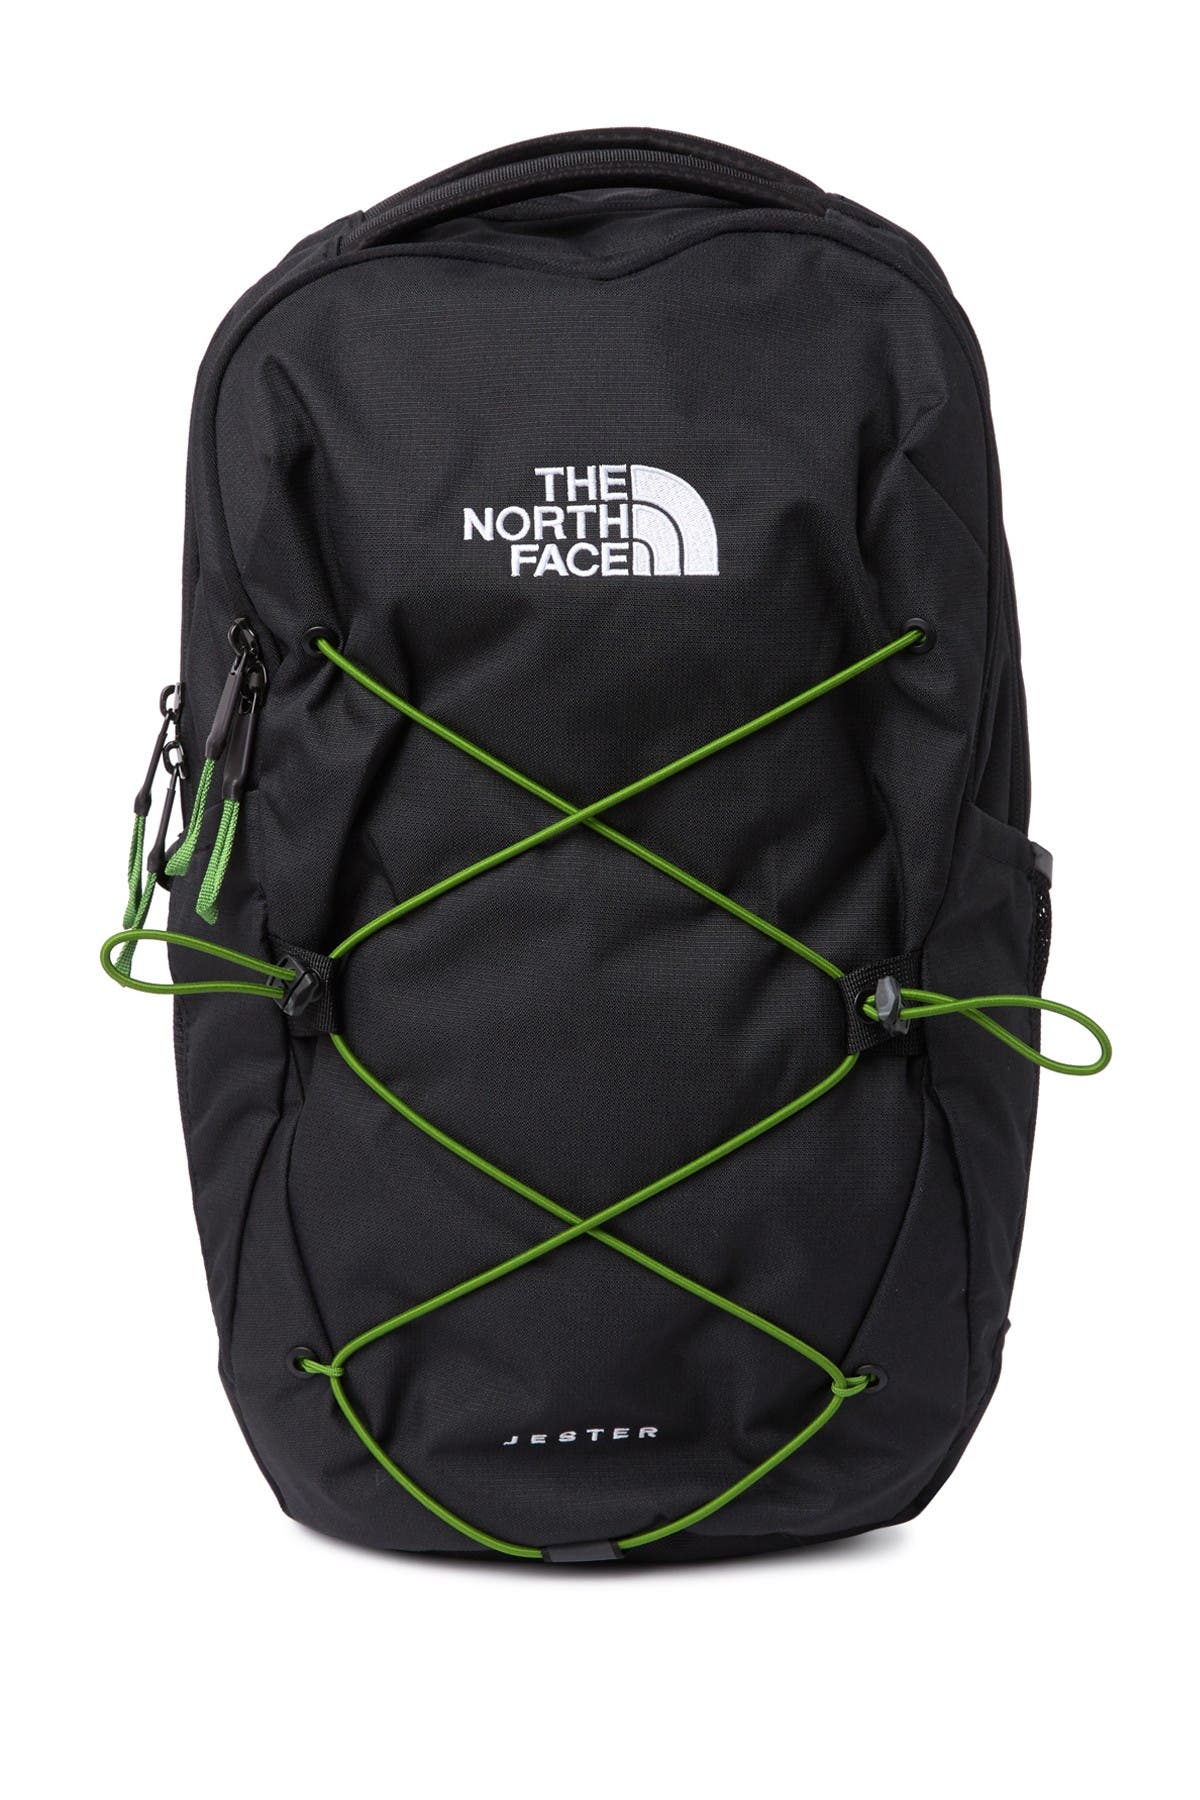 The North Face | Jester Laptop Backpack 